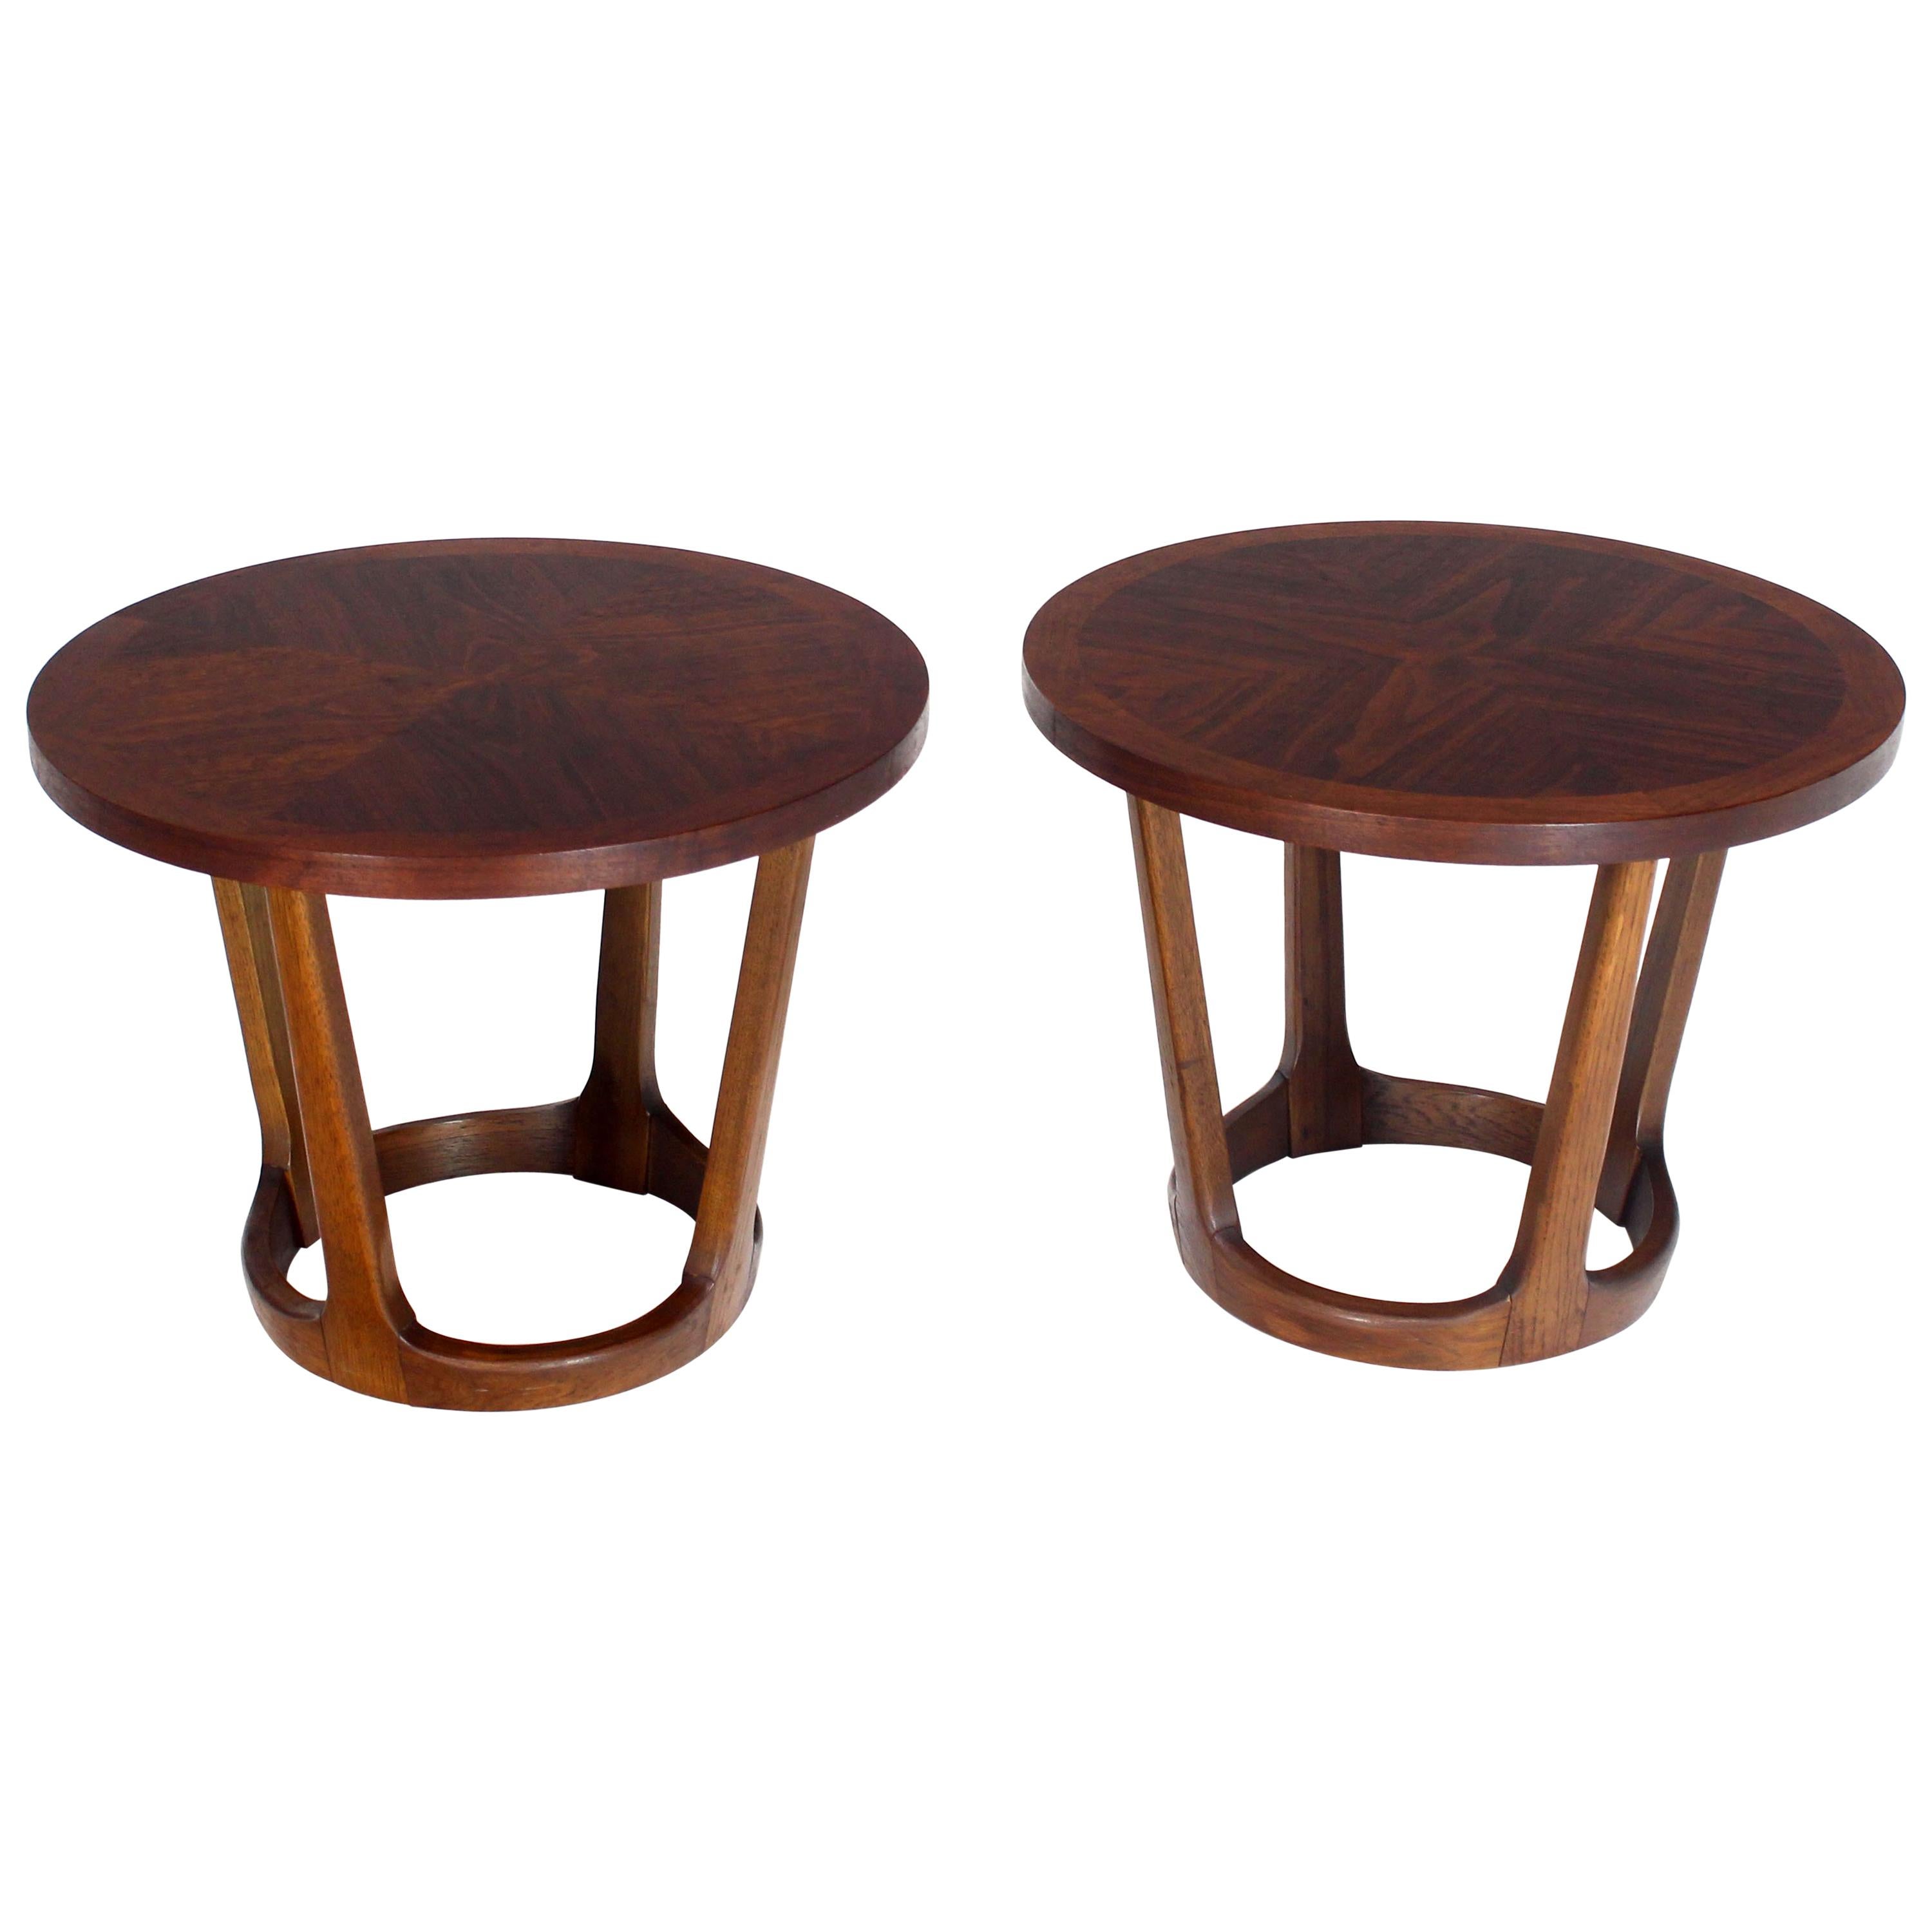 Pair of Round Walnut End Tables Stands on Tapered Bases